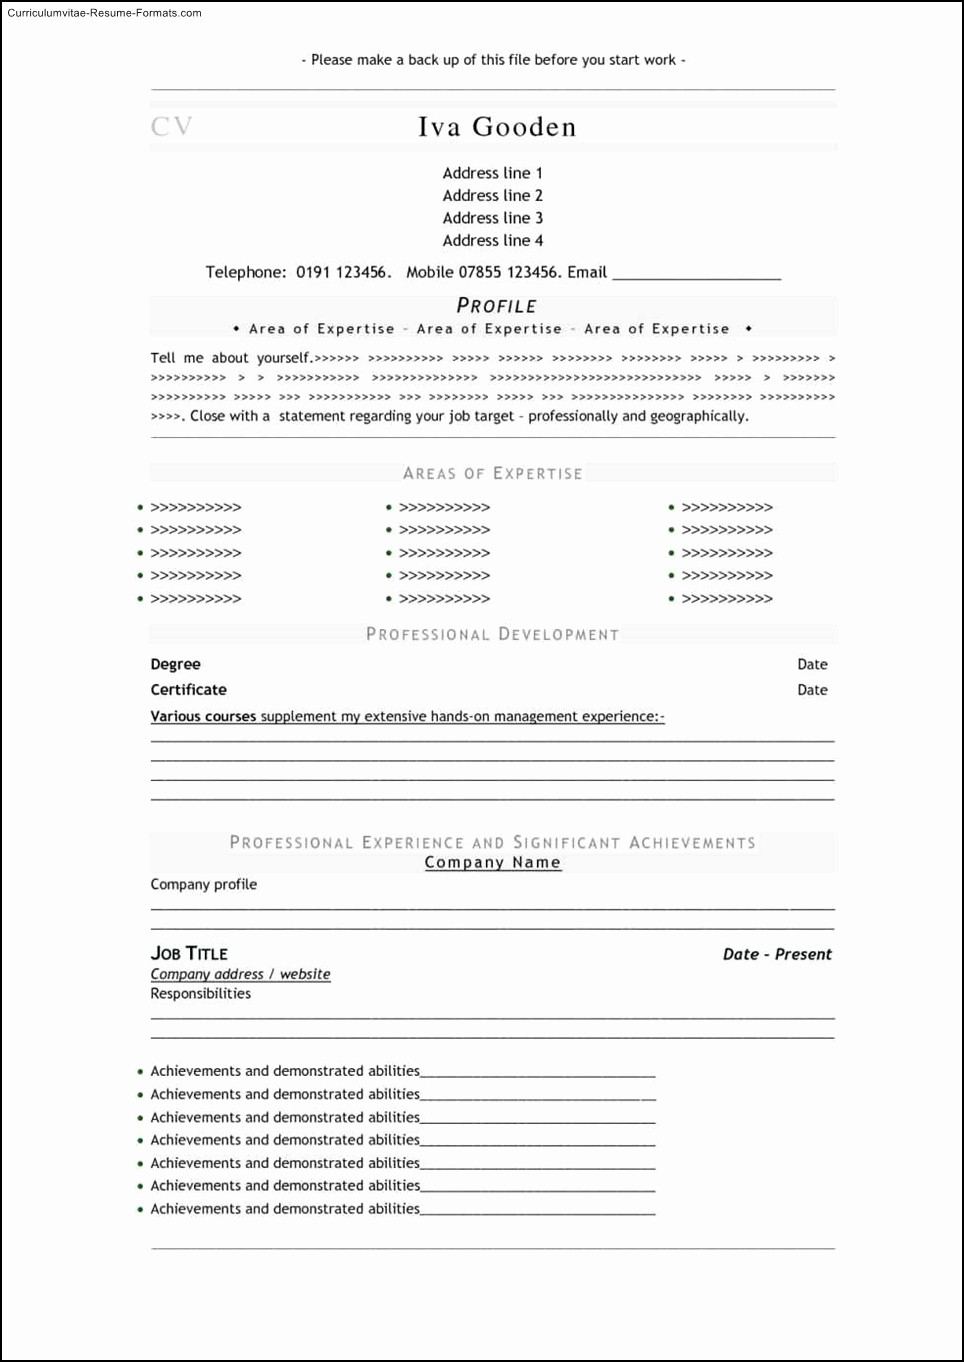 Download Free Professional Resume Templates New Download Free Professional Resume Templates Free Samples